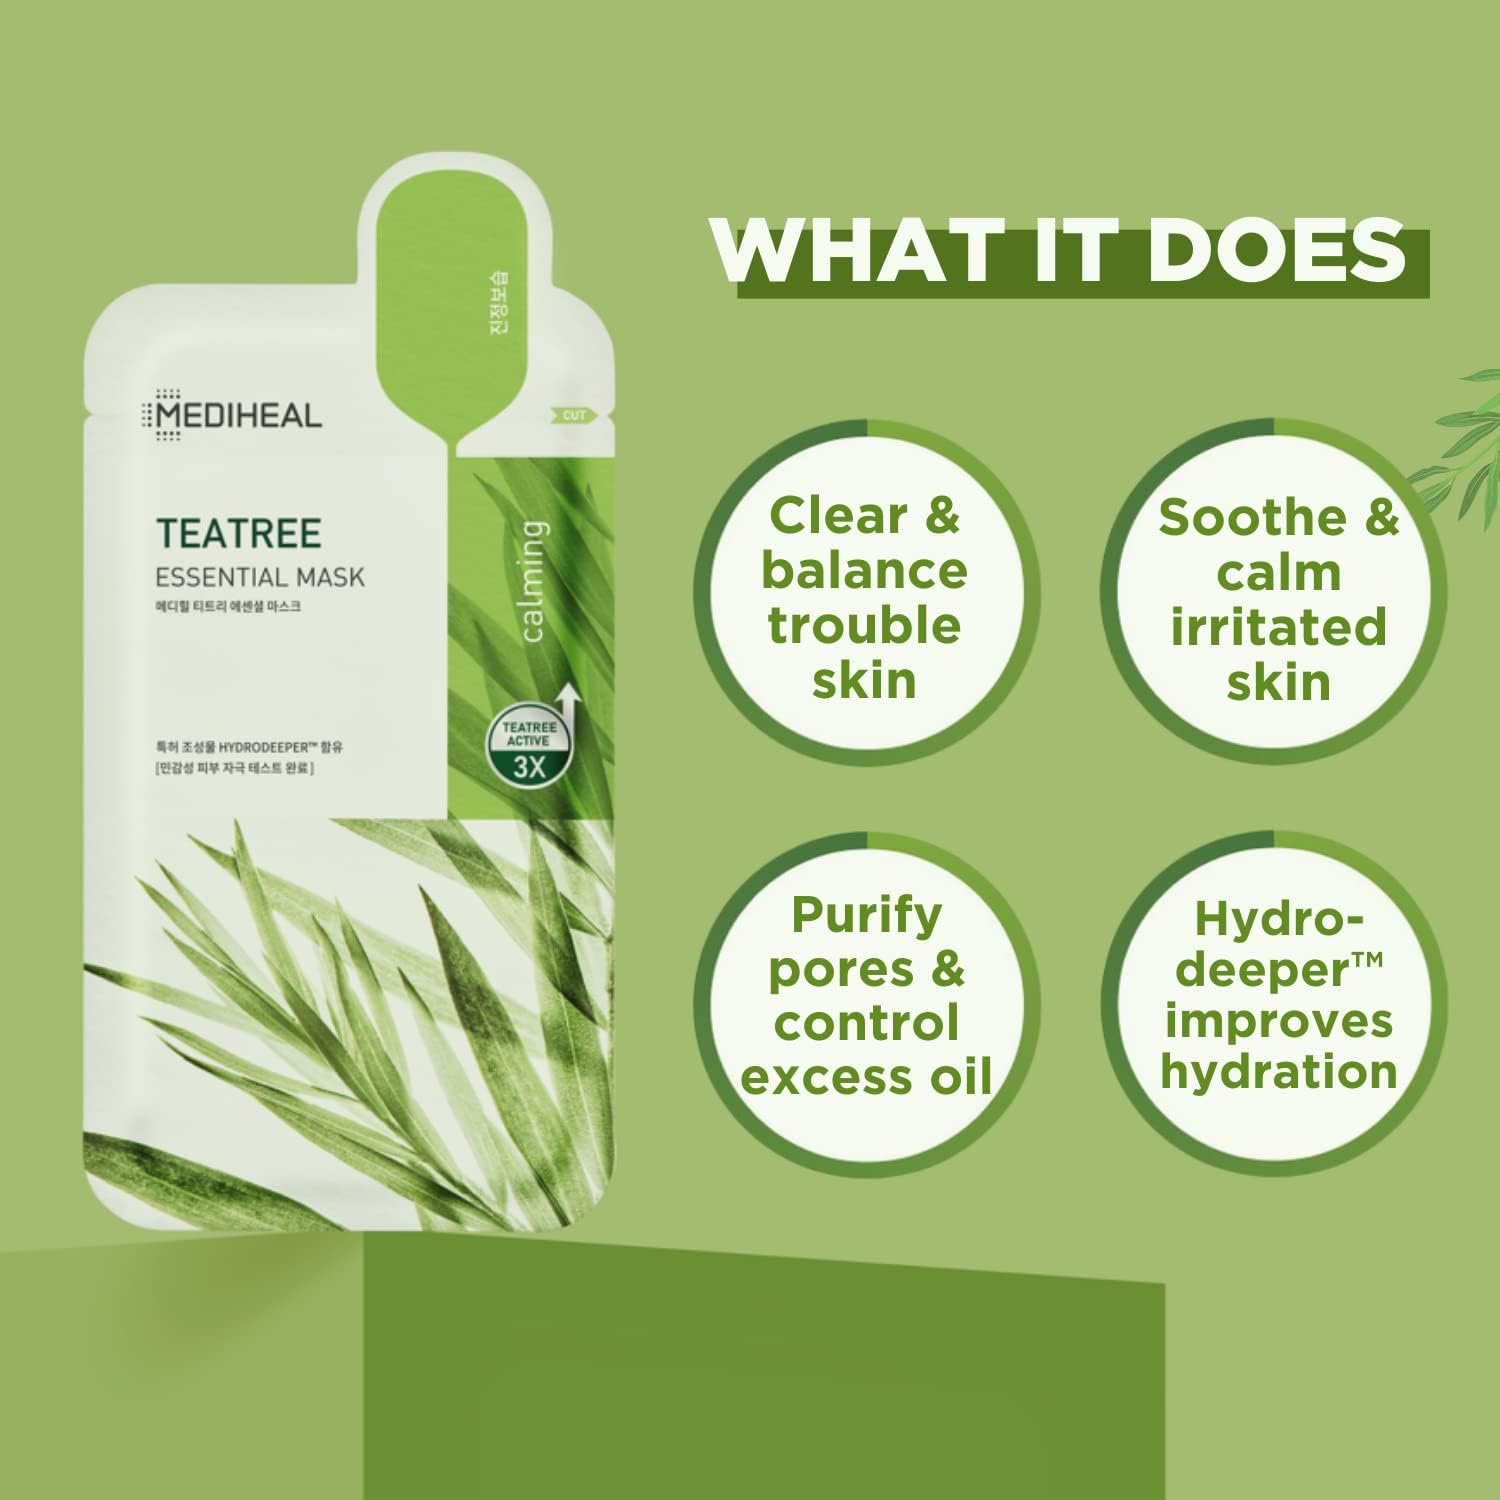 Fabric mask with Tea Tree Extract (Mediheal Teatree Care Solution Essential Mask)